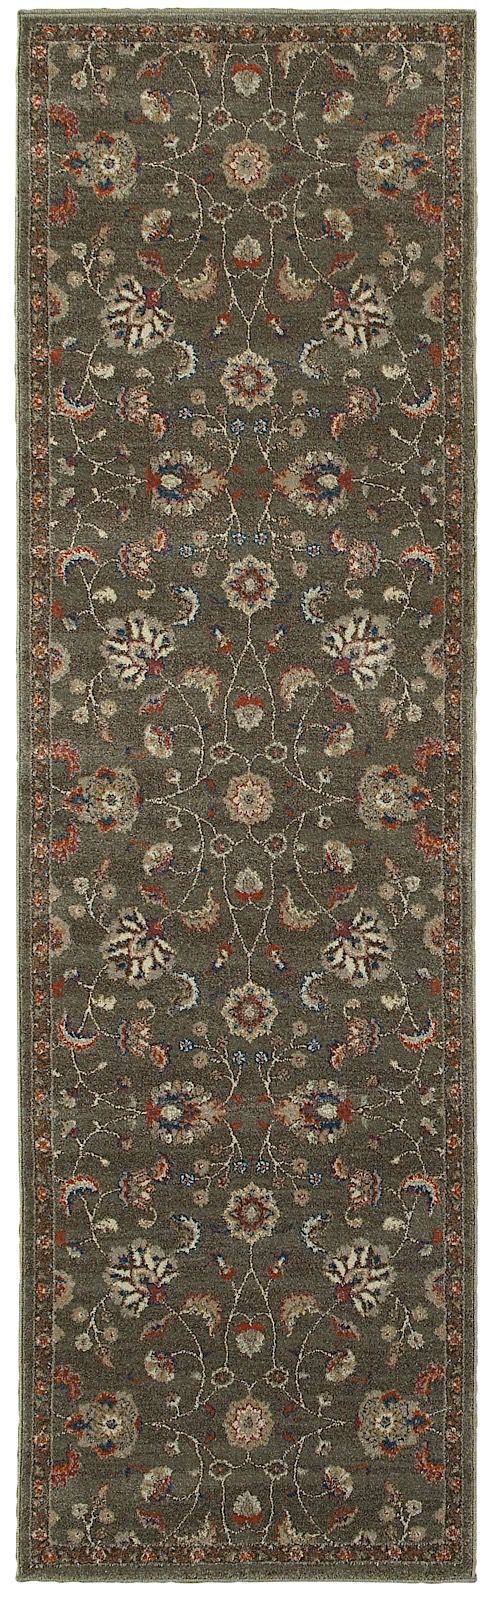 oriental weavers pasha traditional area rug collection